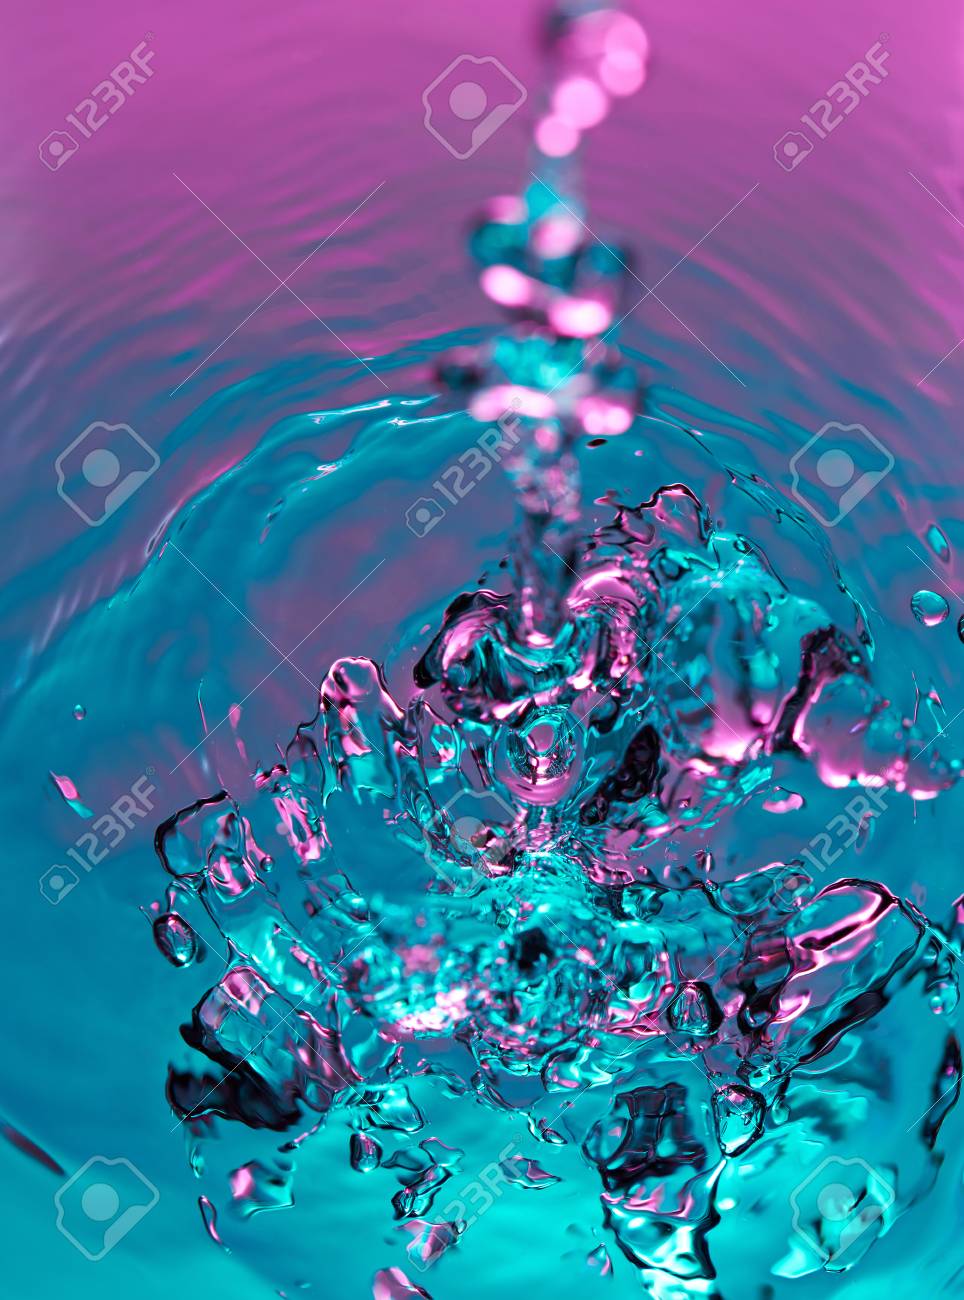 Absract Colorful Wallpaper Background Clear Water Splash Frozen